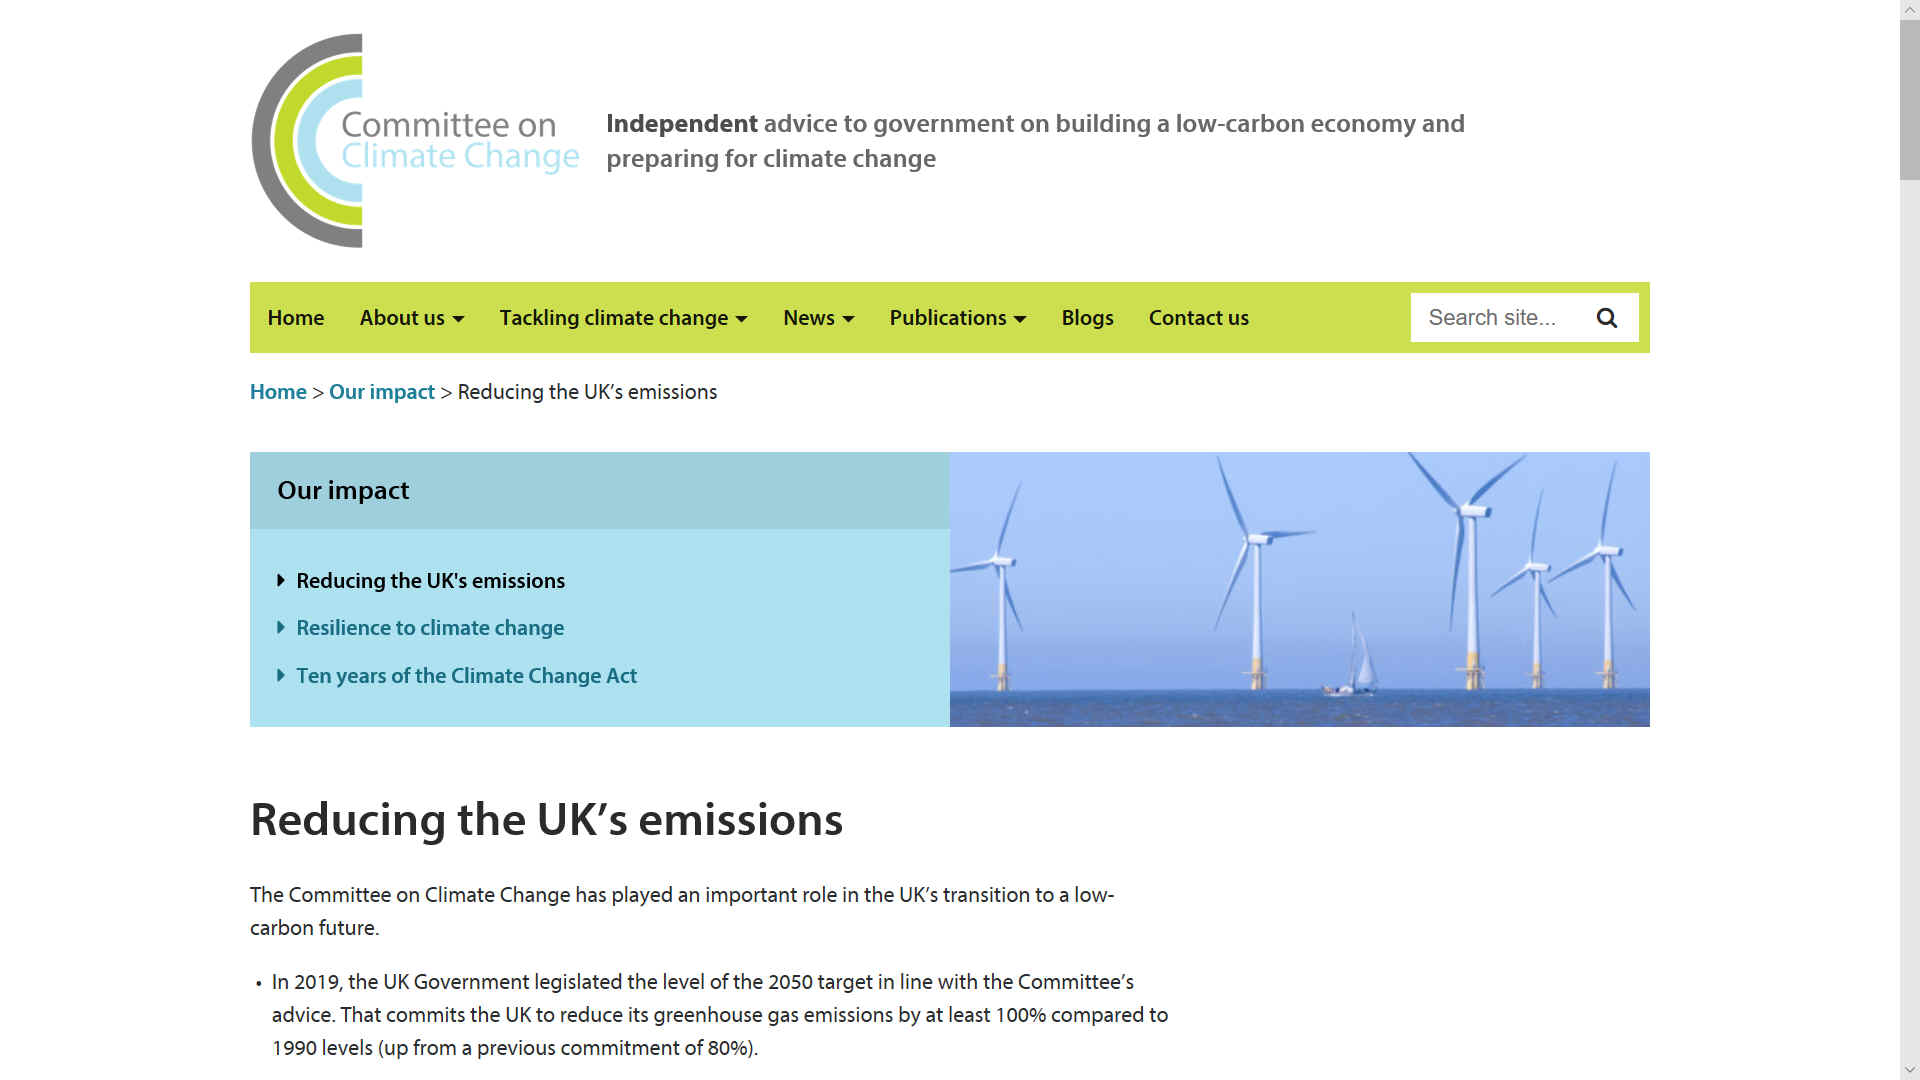 The Committee on Climate Change UK advisory service